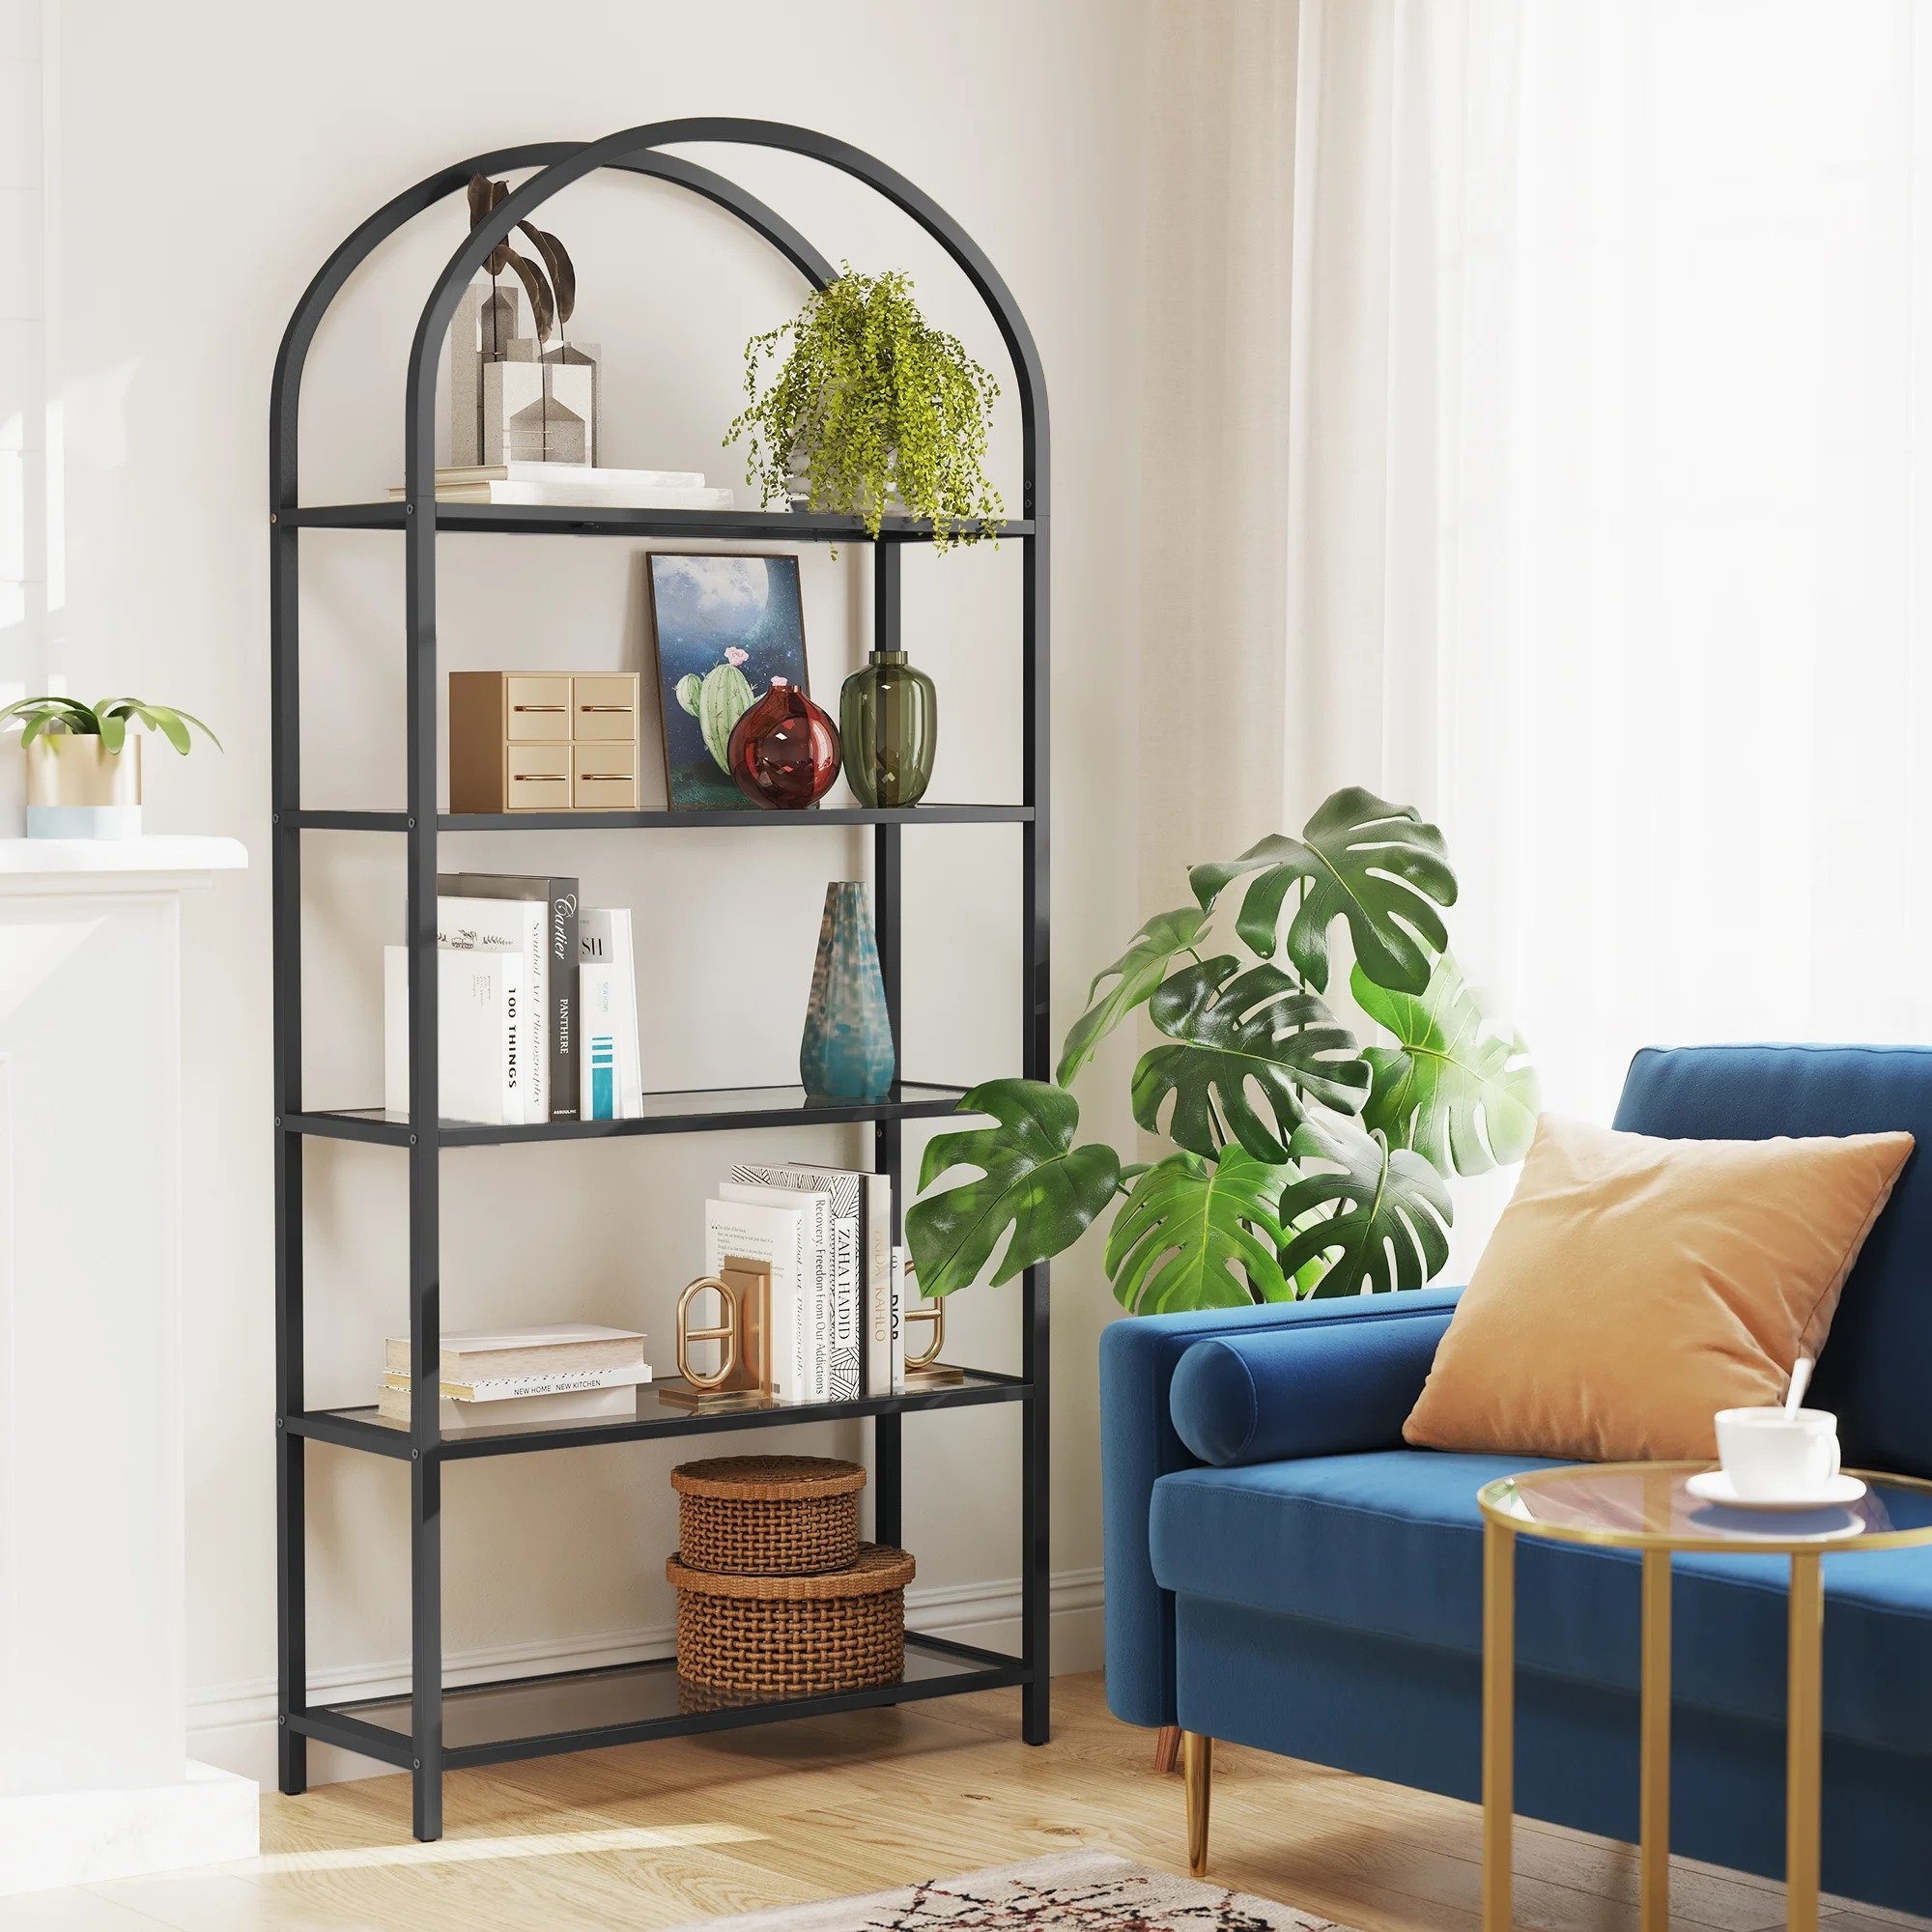 The five-tier shelf with a arch design and matte black finish